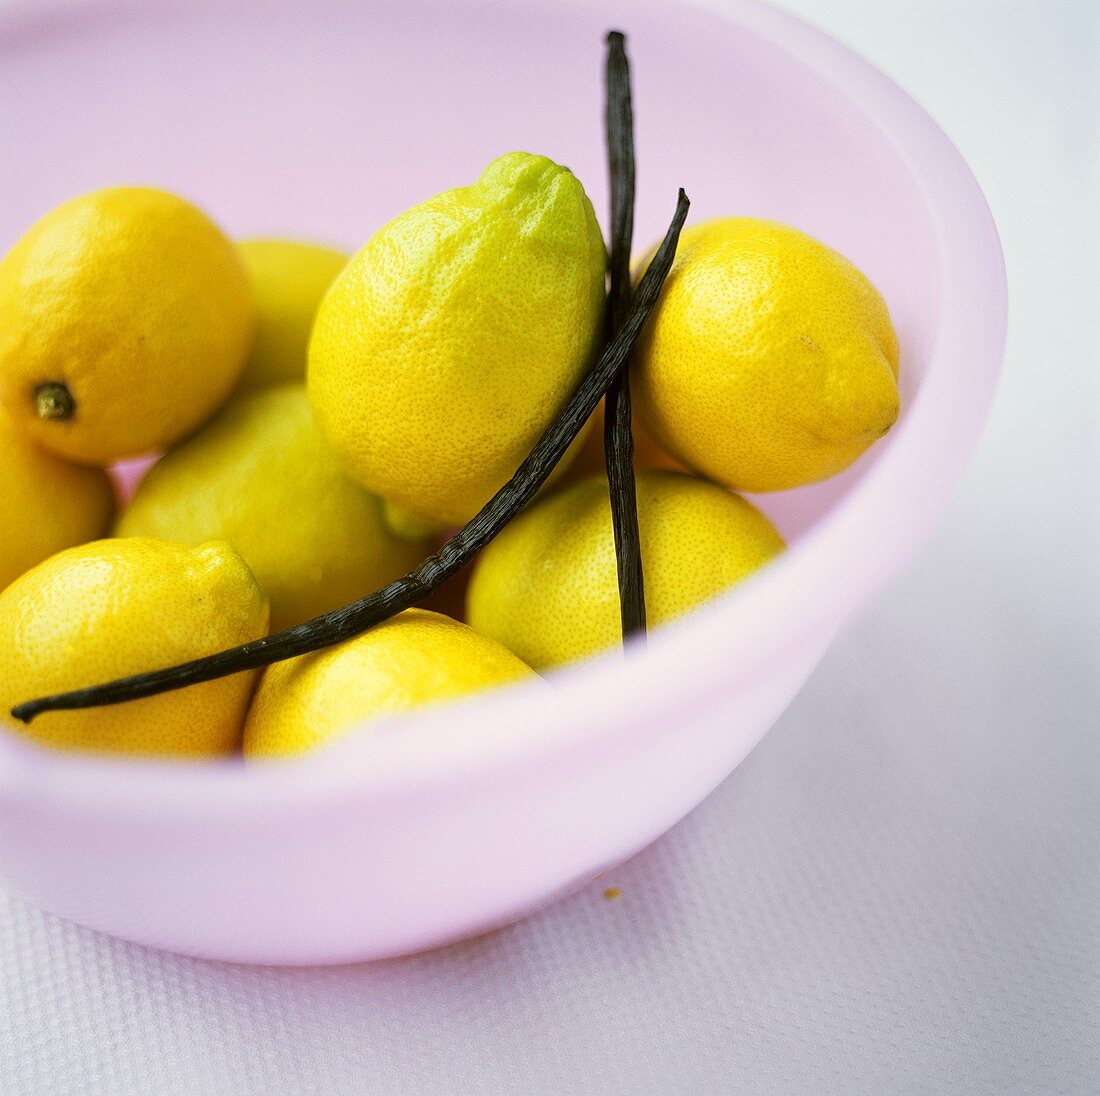 Lemons in dish with vanilla pods